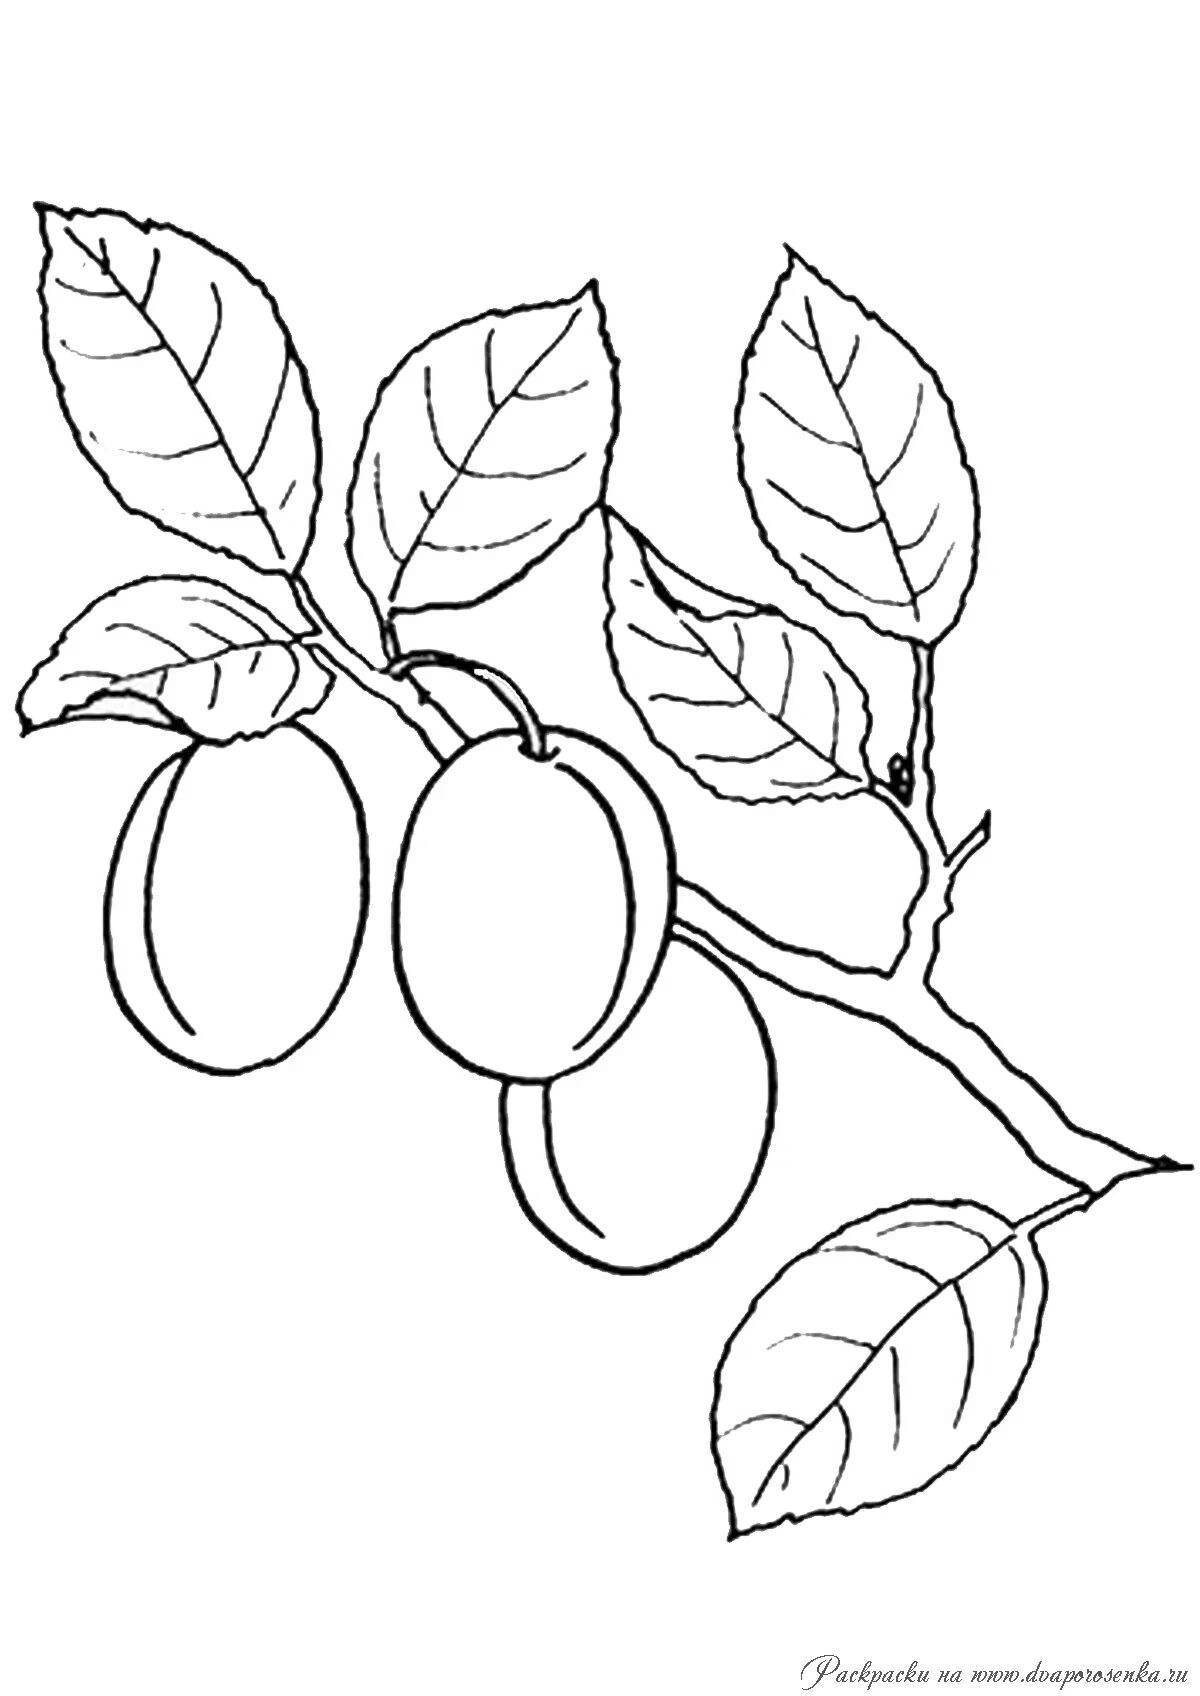 Showy apricot coloring book for kids